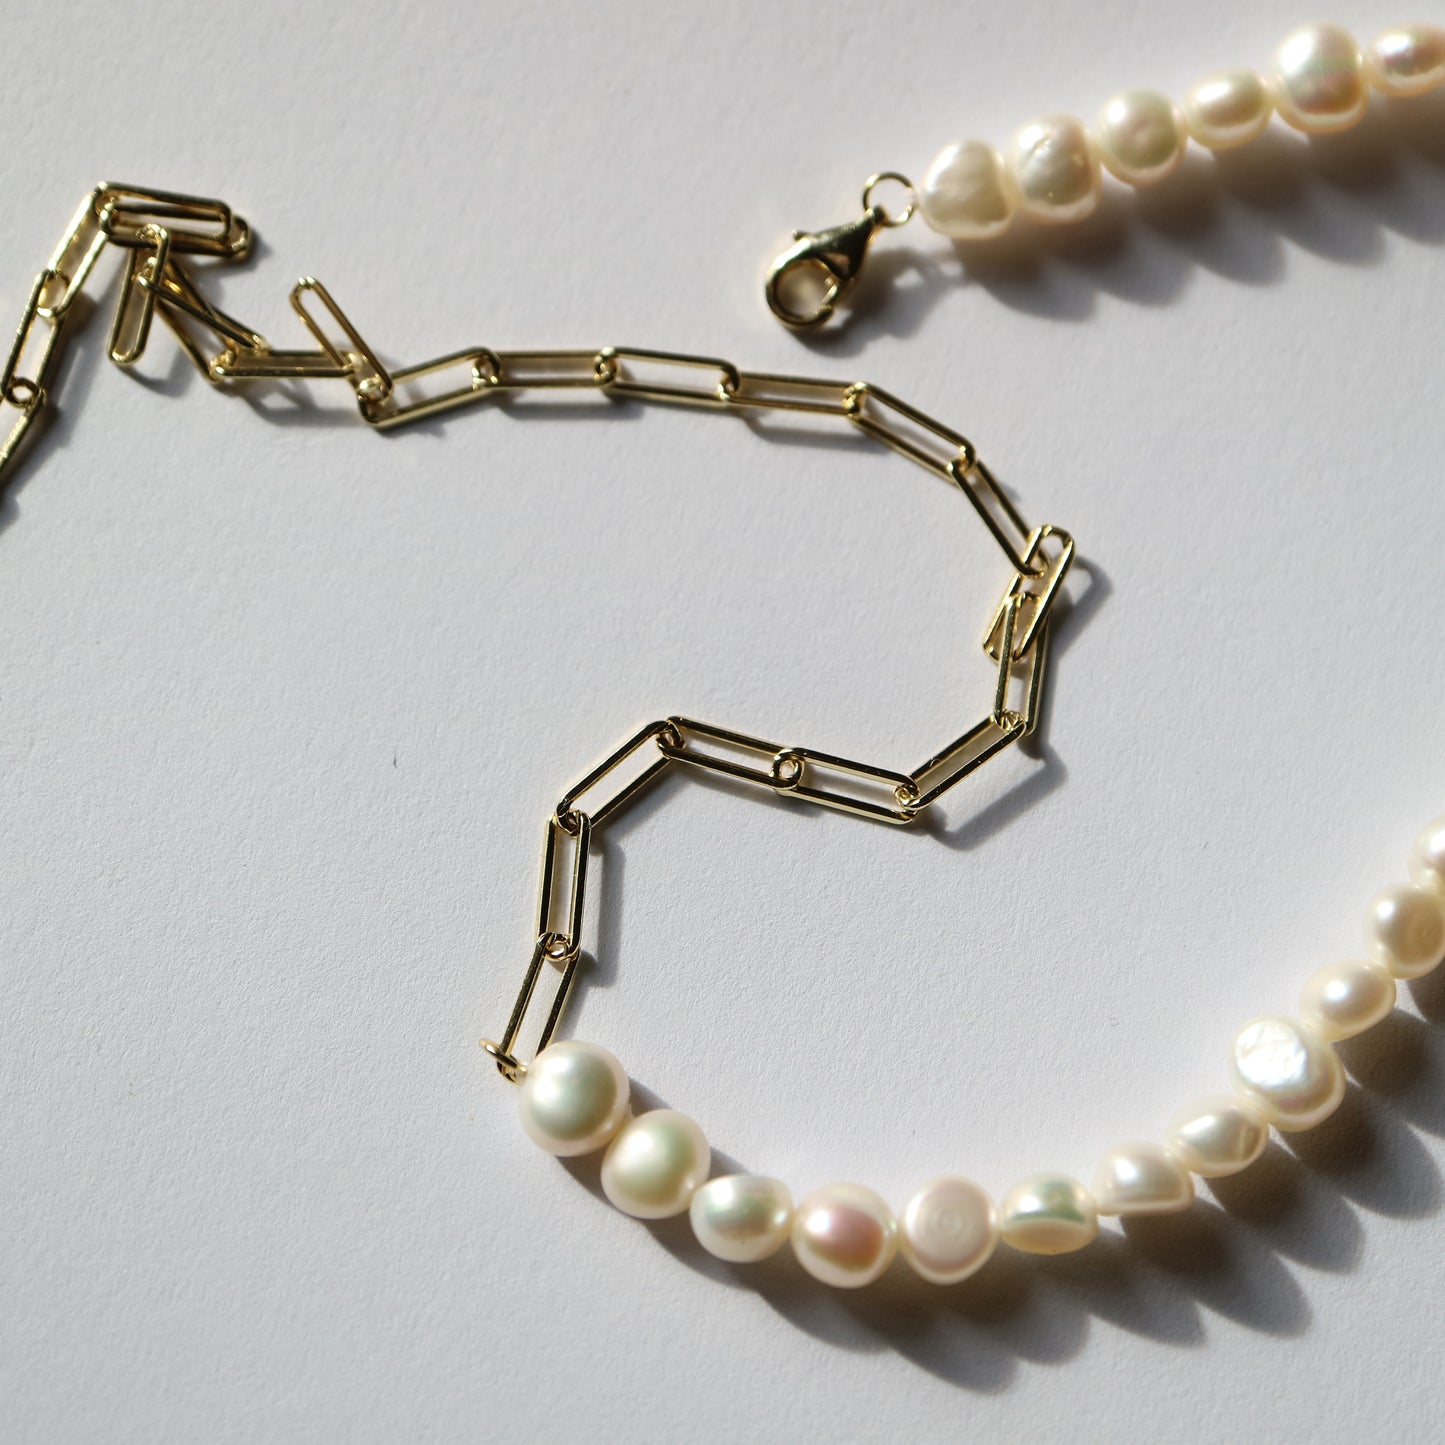 Pearly Necklace with Paperclip Chain in gold